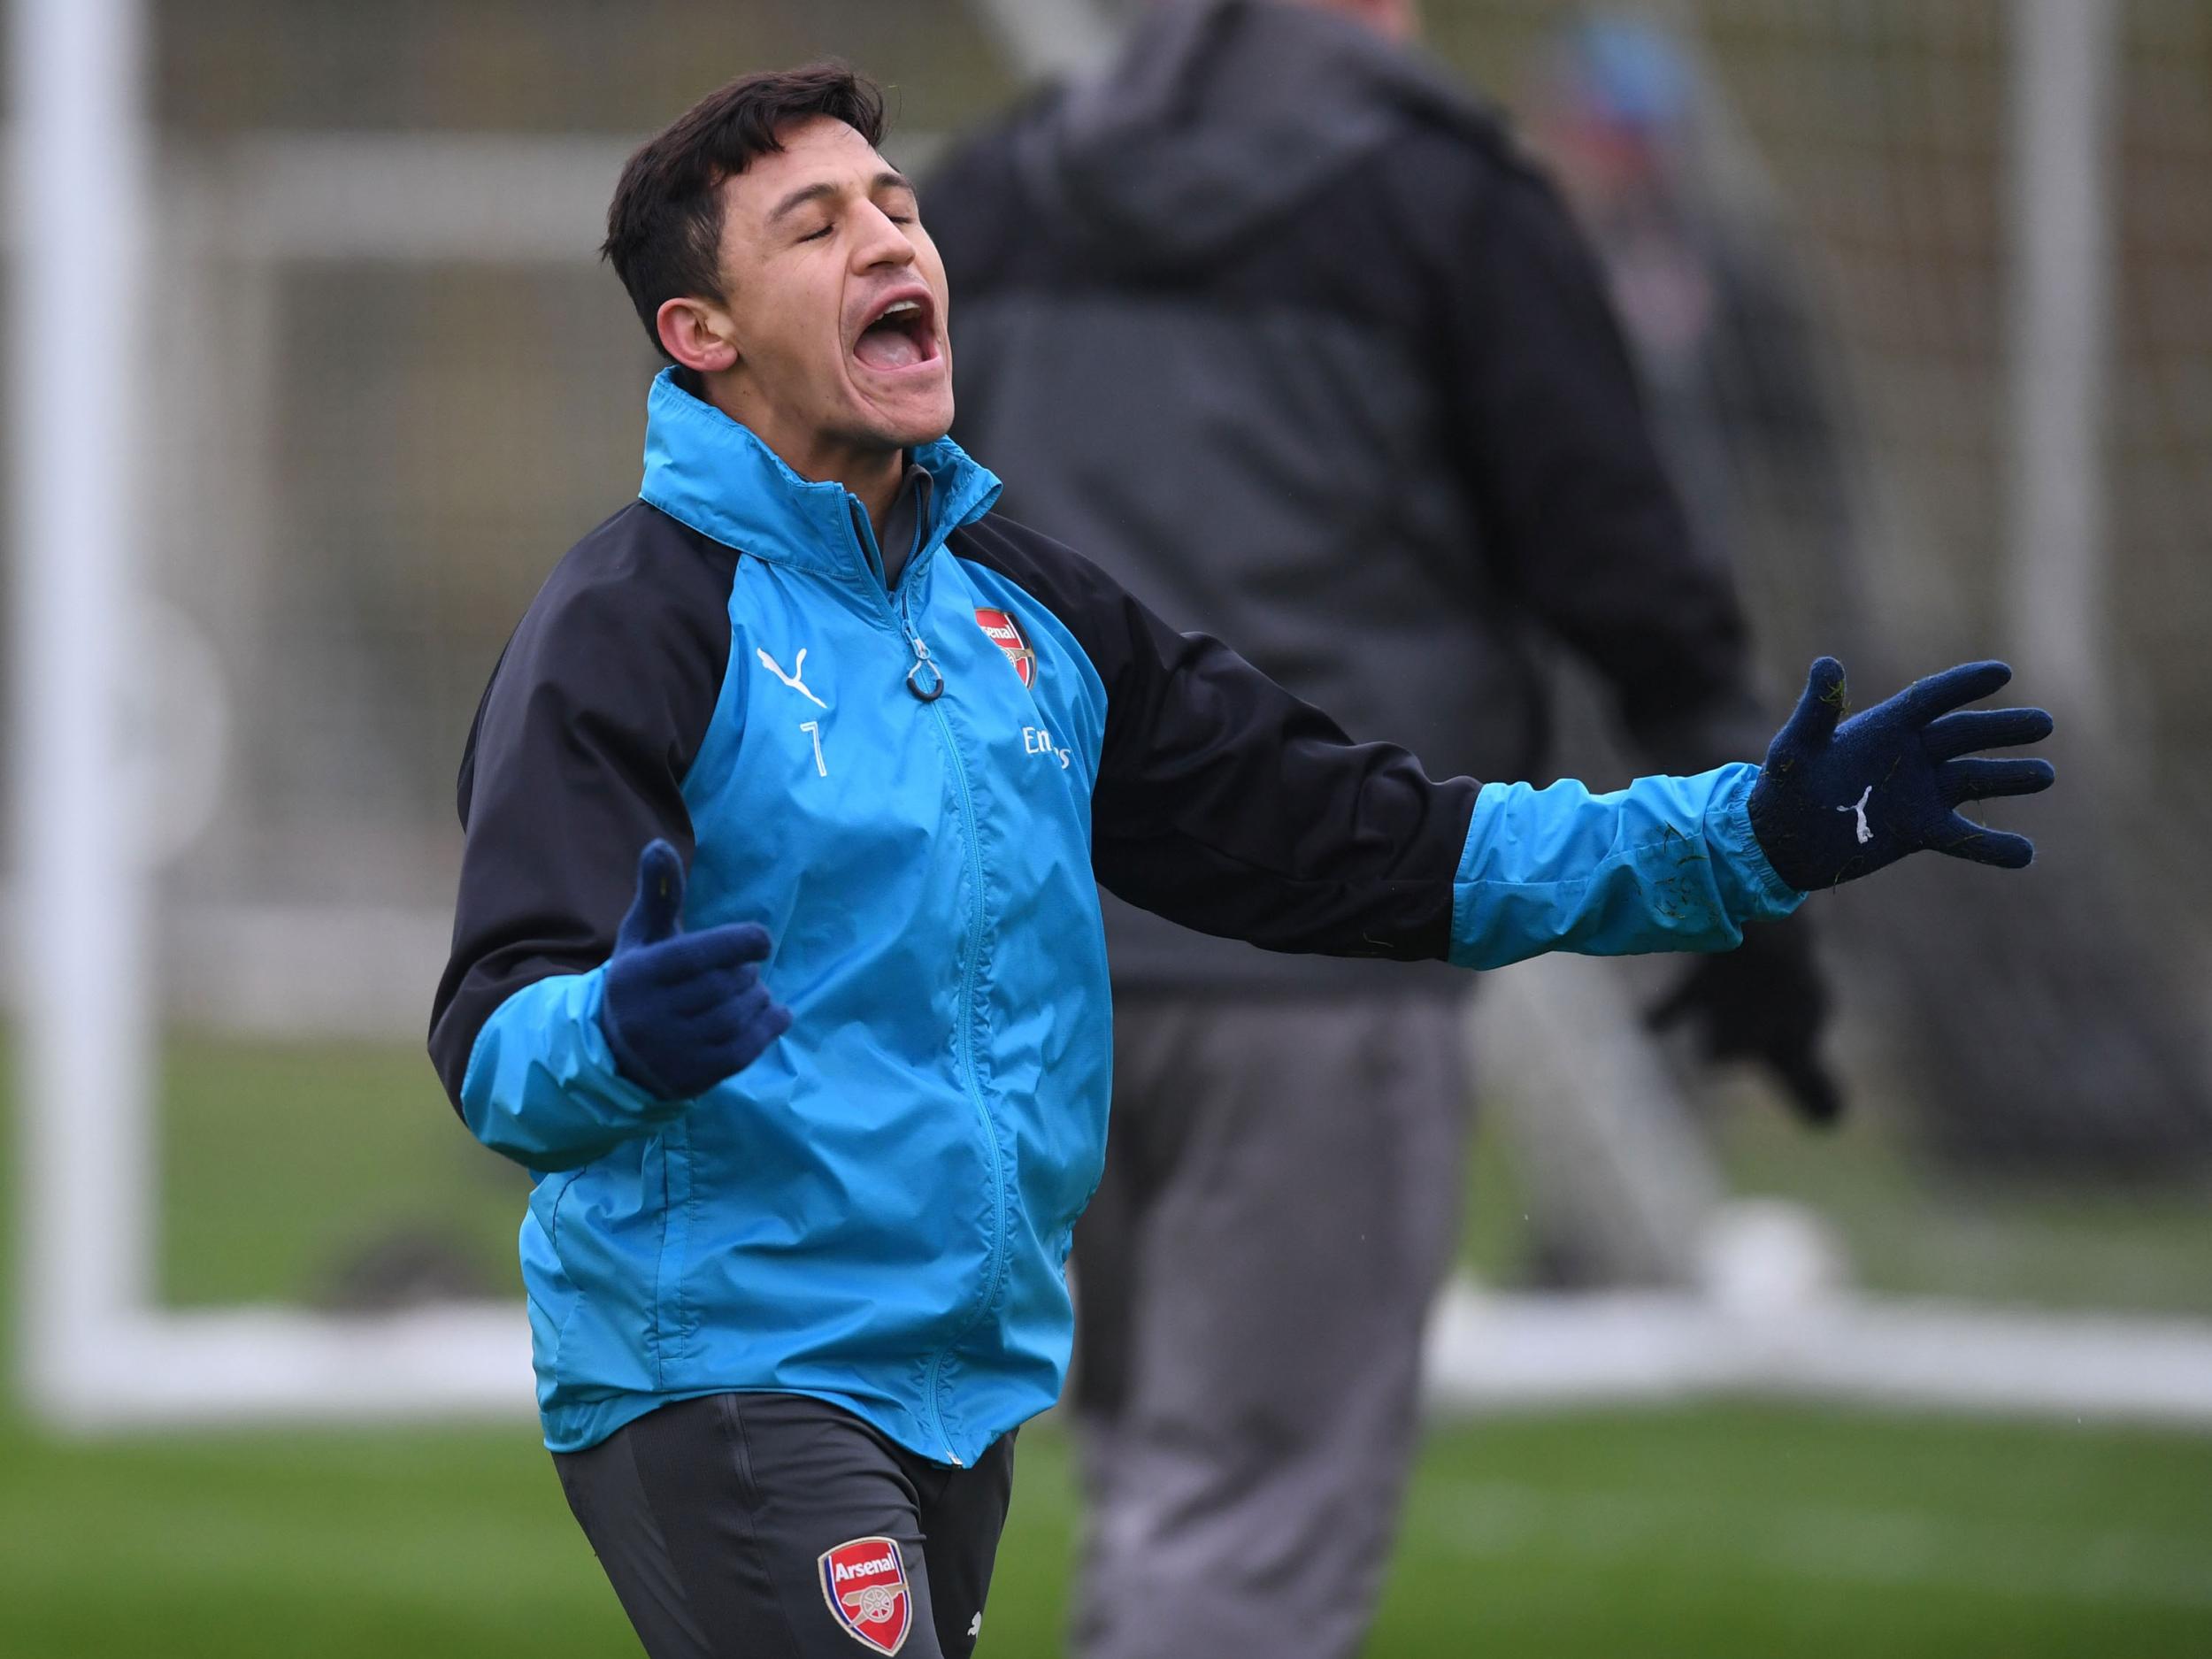 Alexis Sanchez is likely to become a Manchester City player, either soon or in the summer